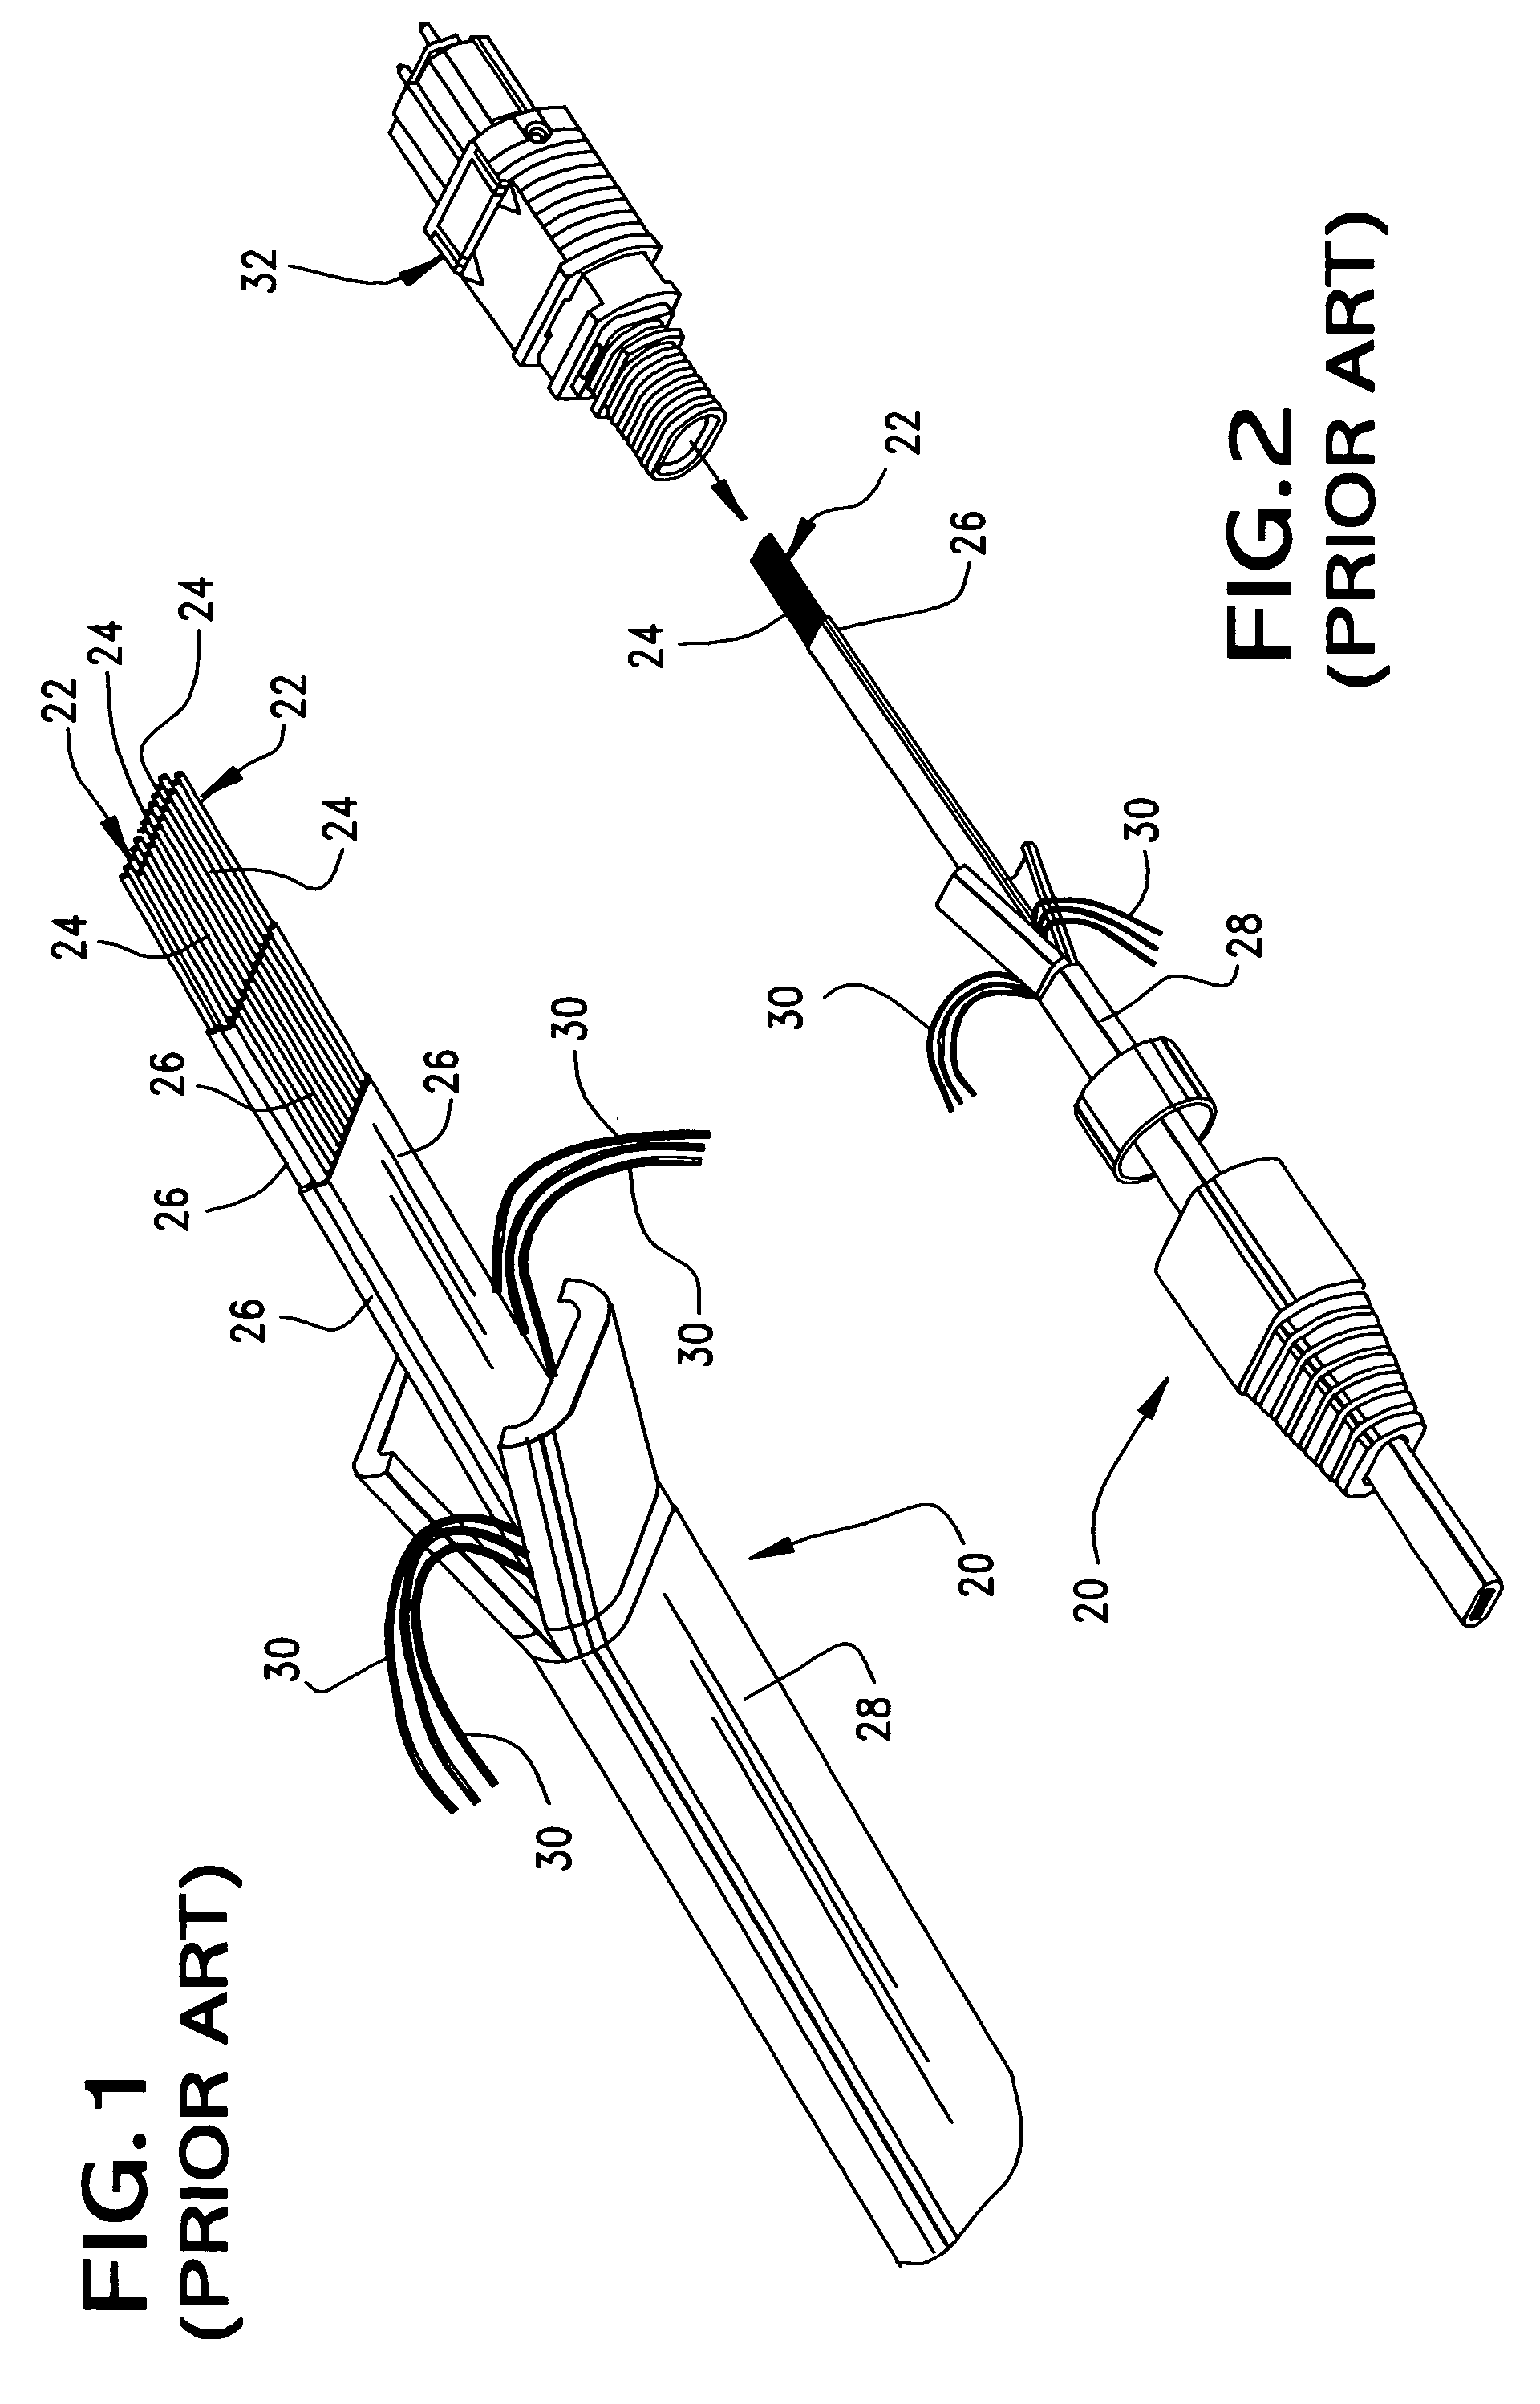 Round multi-fiber cable assembly and a method of forming same